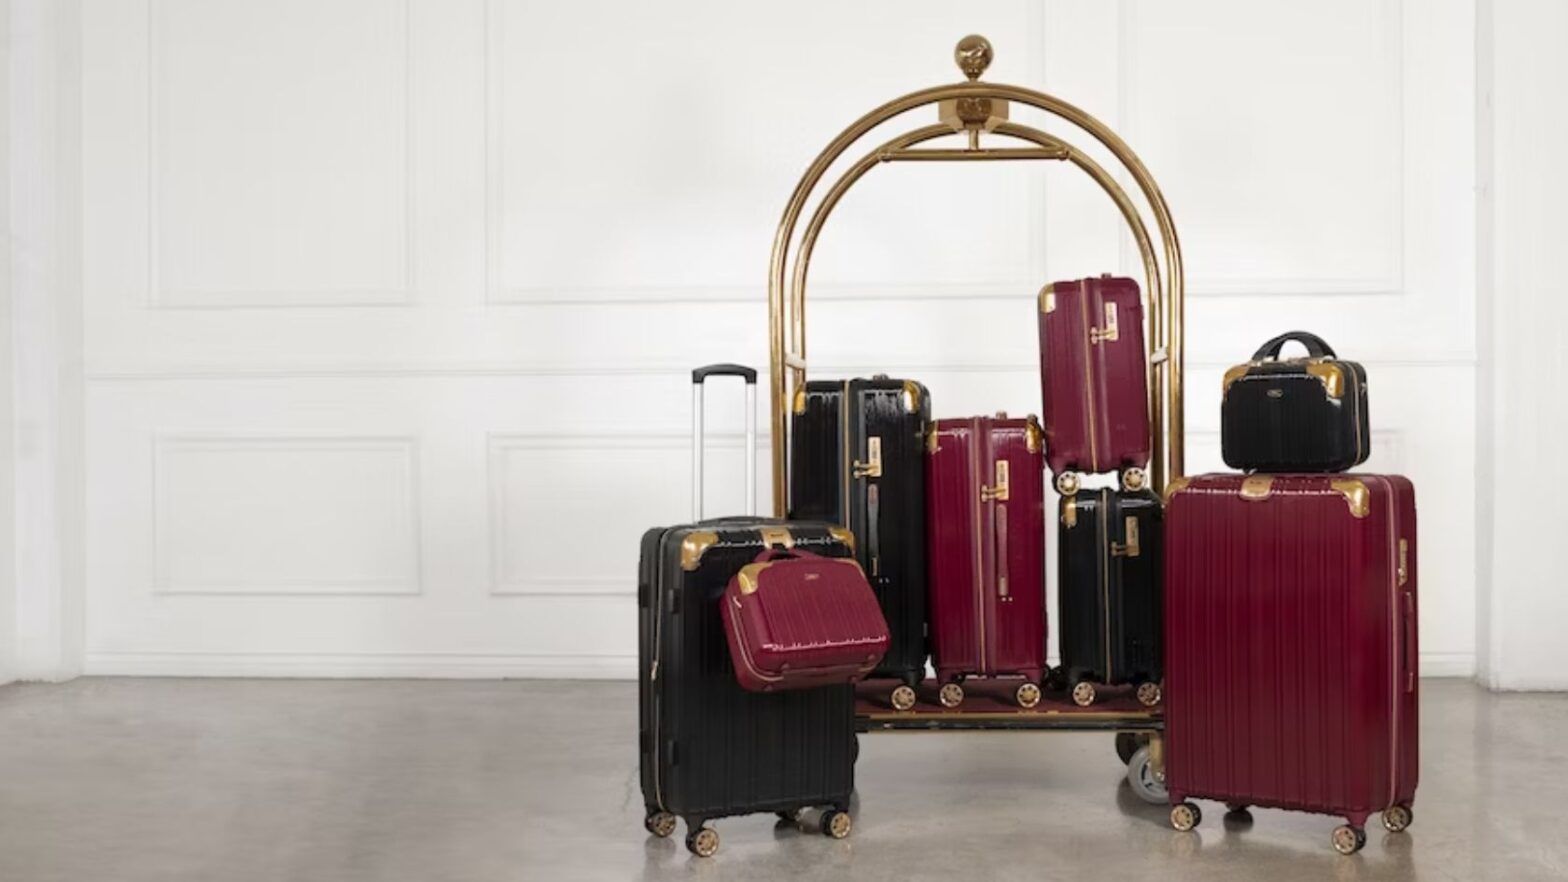 TN Approved: Check Out This Amazon Prime Day Luggage Find